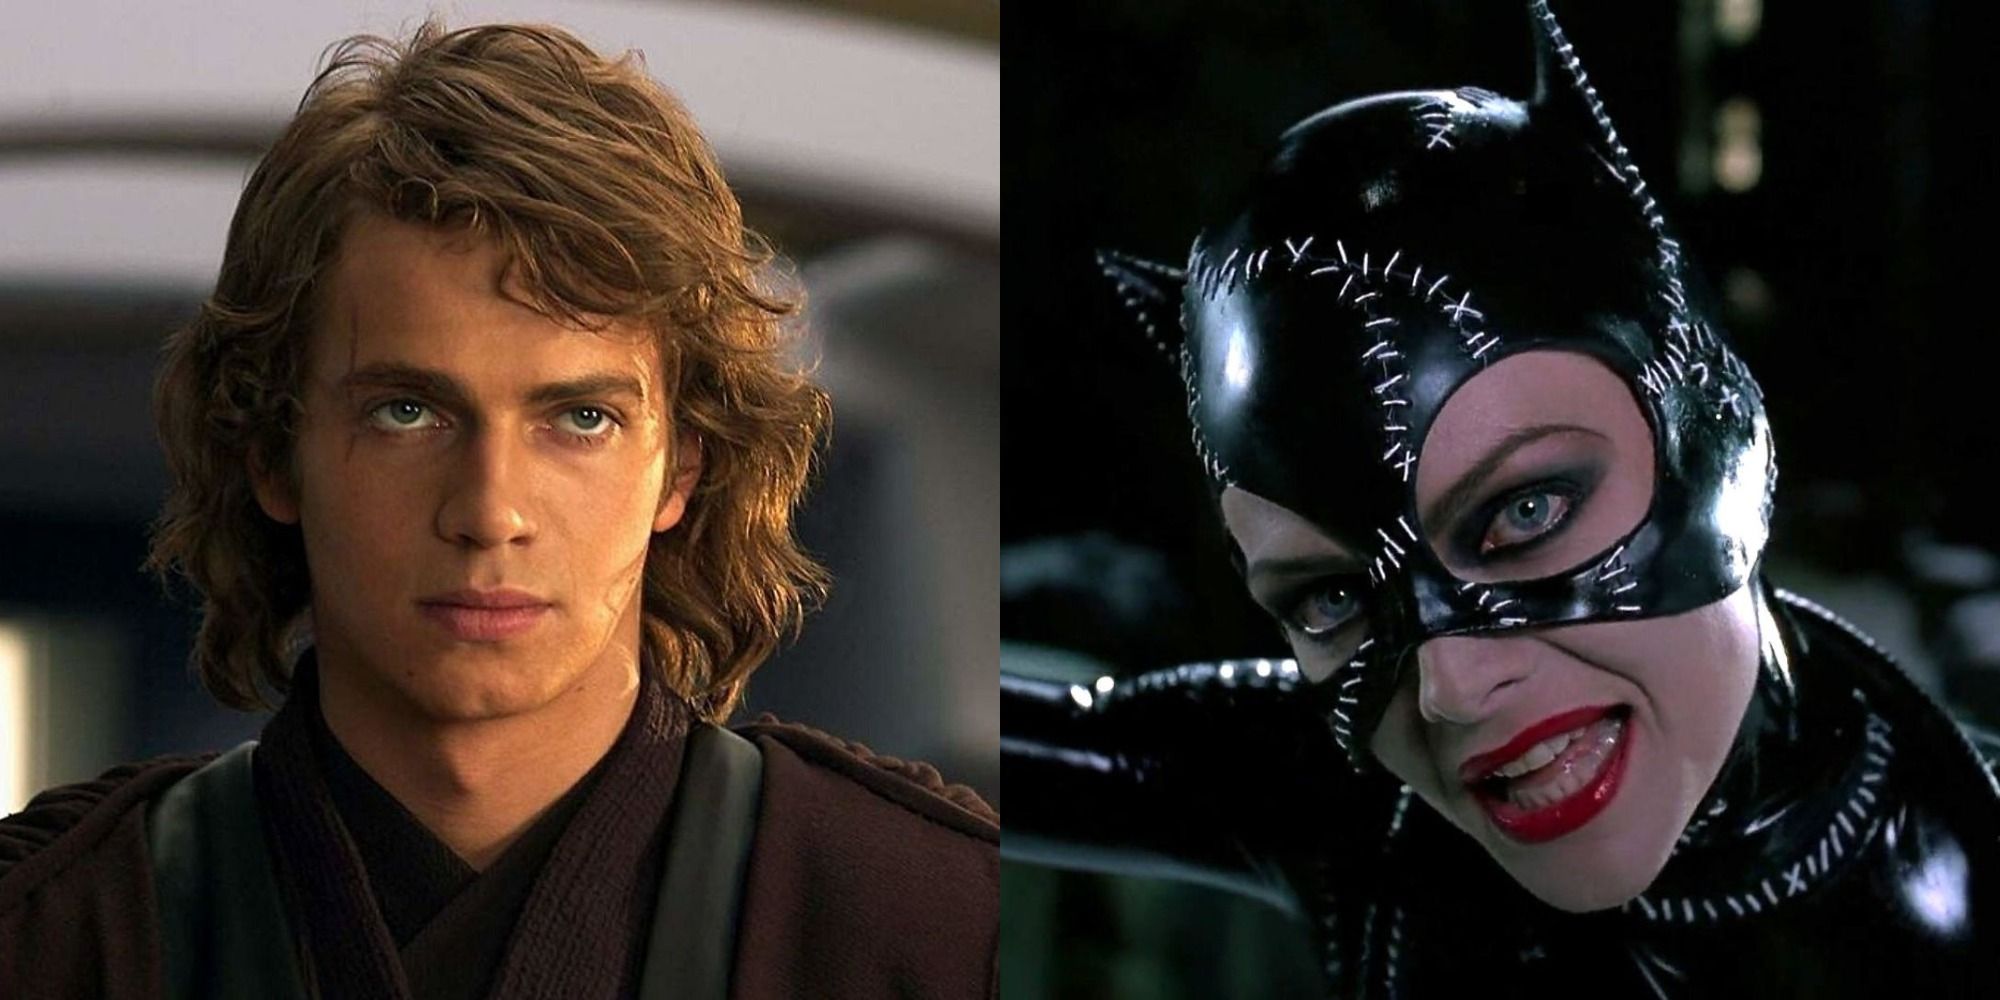 Split image showing Anakin in Star Wars and Catwoman in Batman Returns.